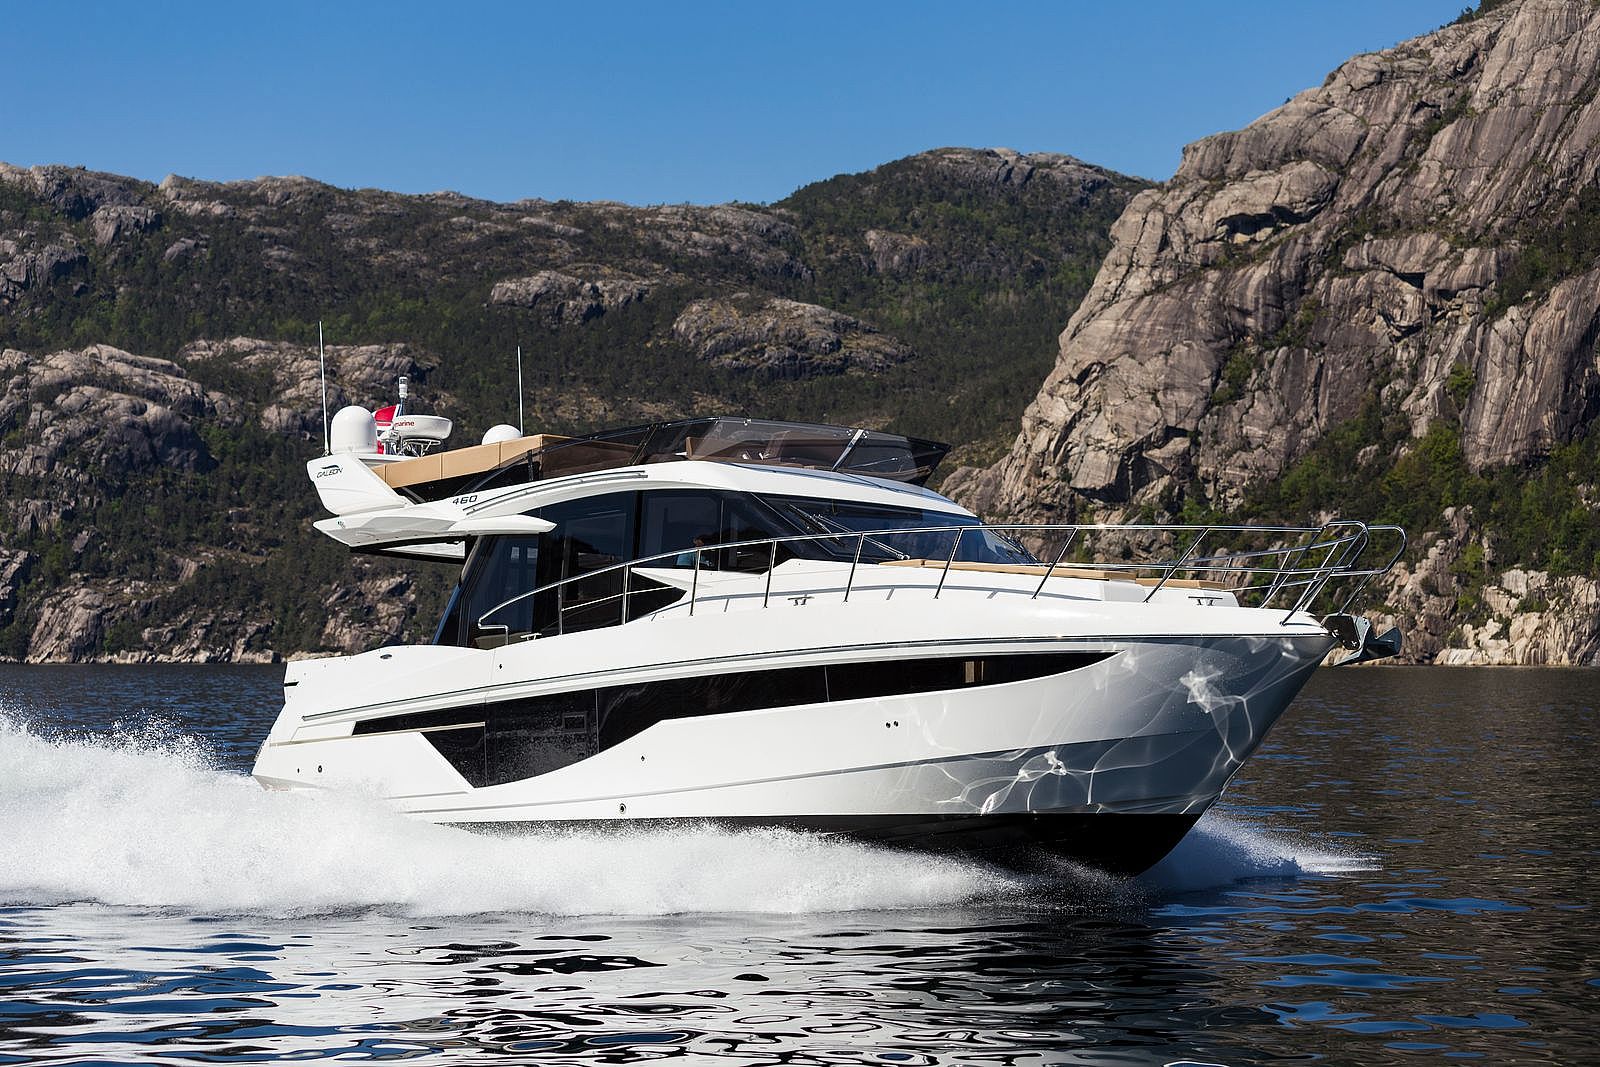 Galeon 460 FLY2022 for sale: 575400.-EUR